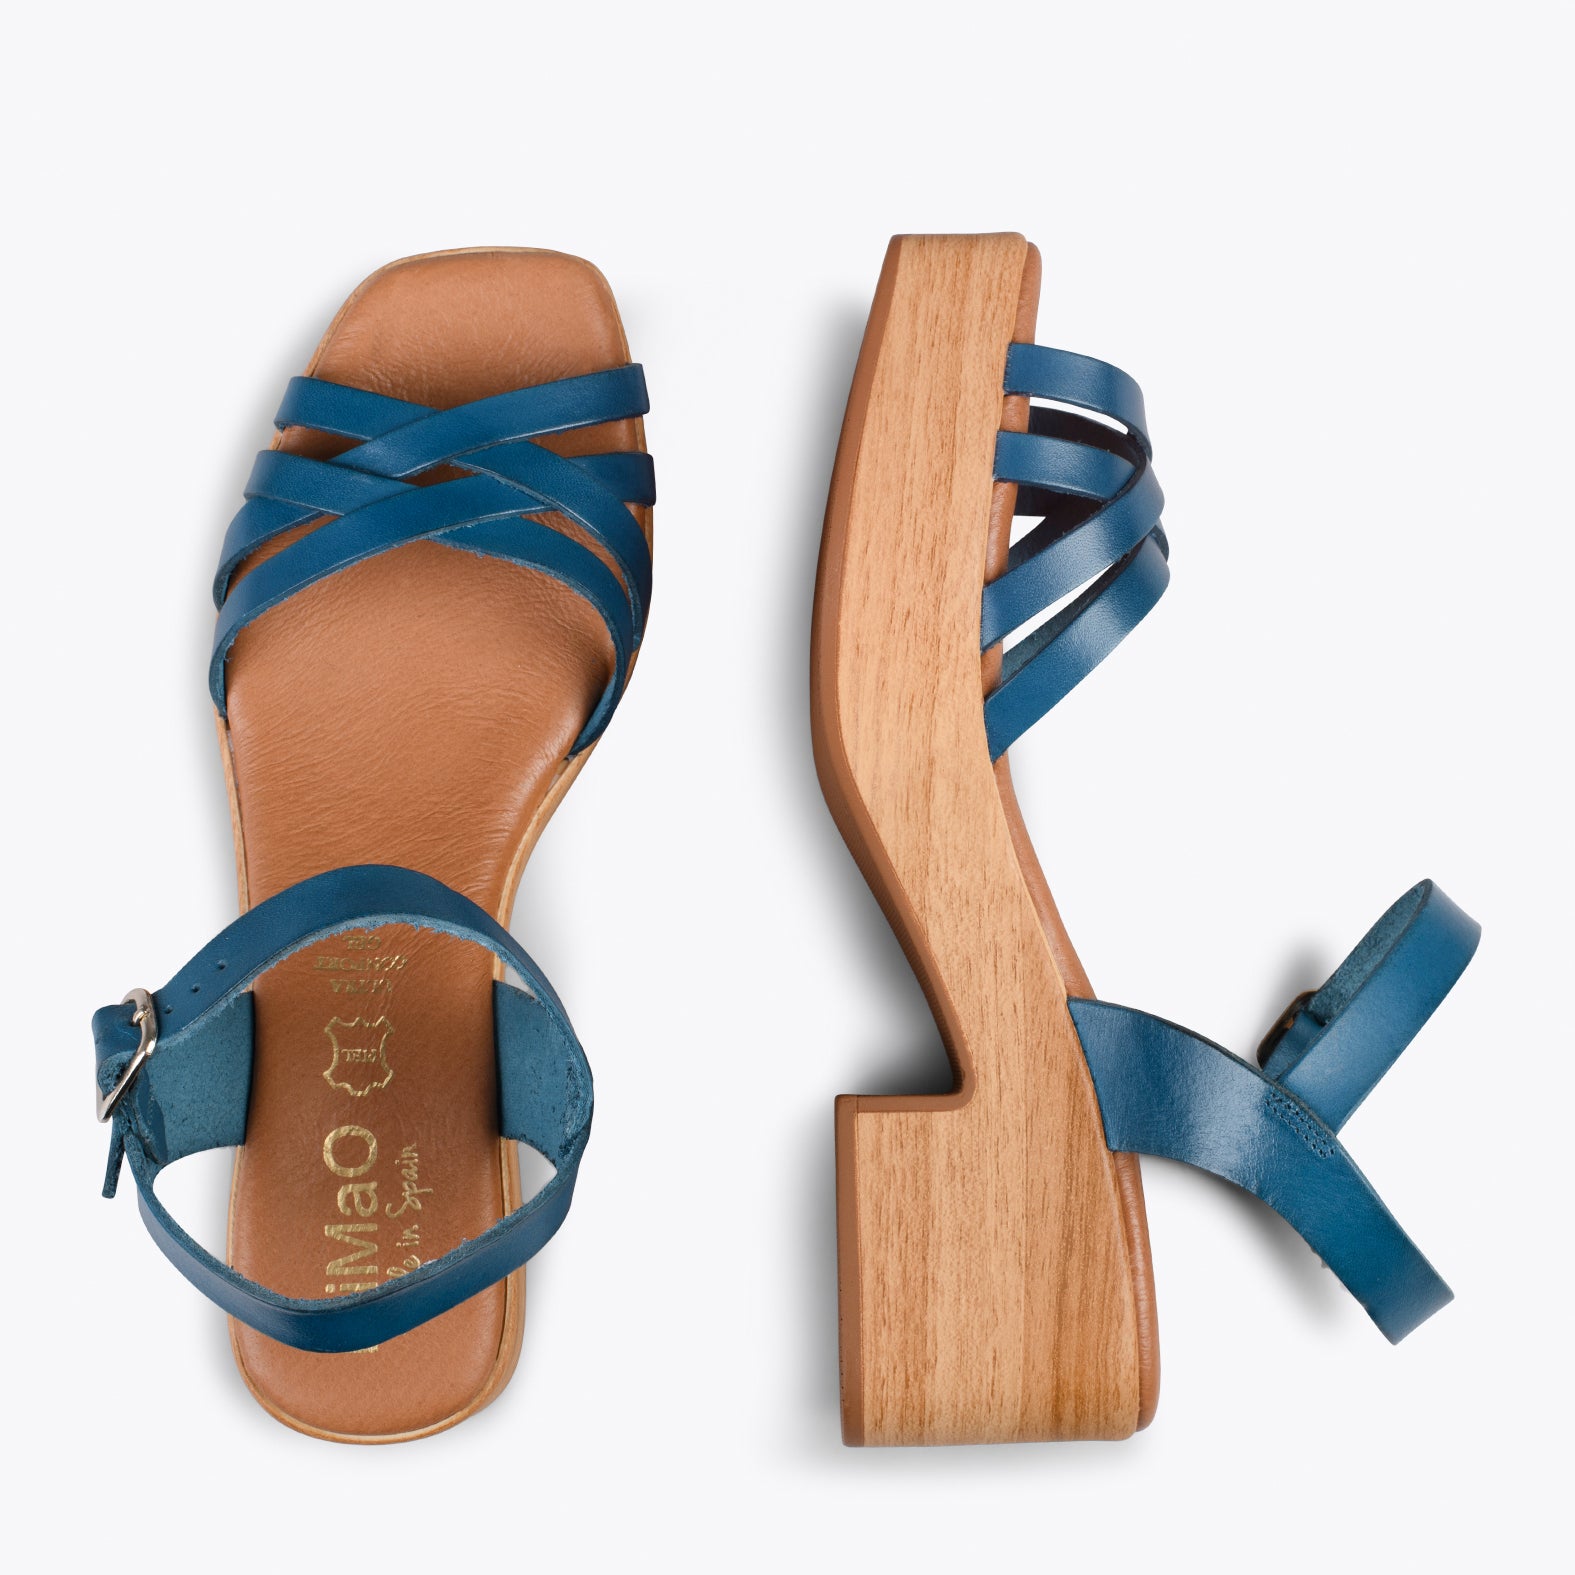 WOOD – BLUE strappy sandal with wooden heel